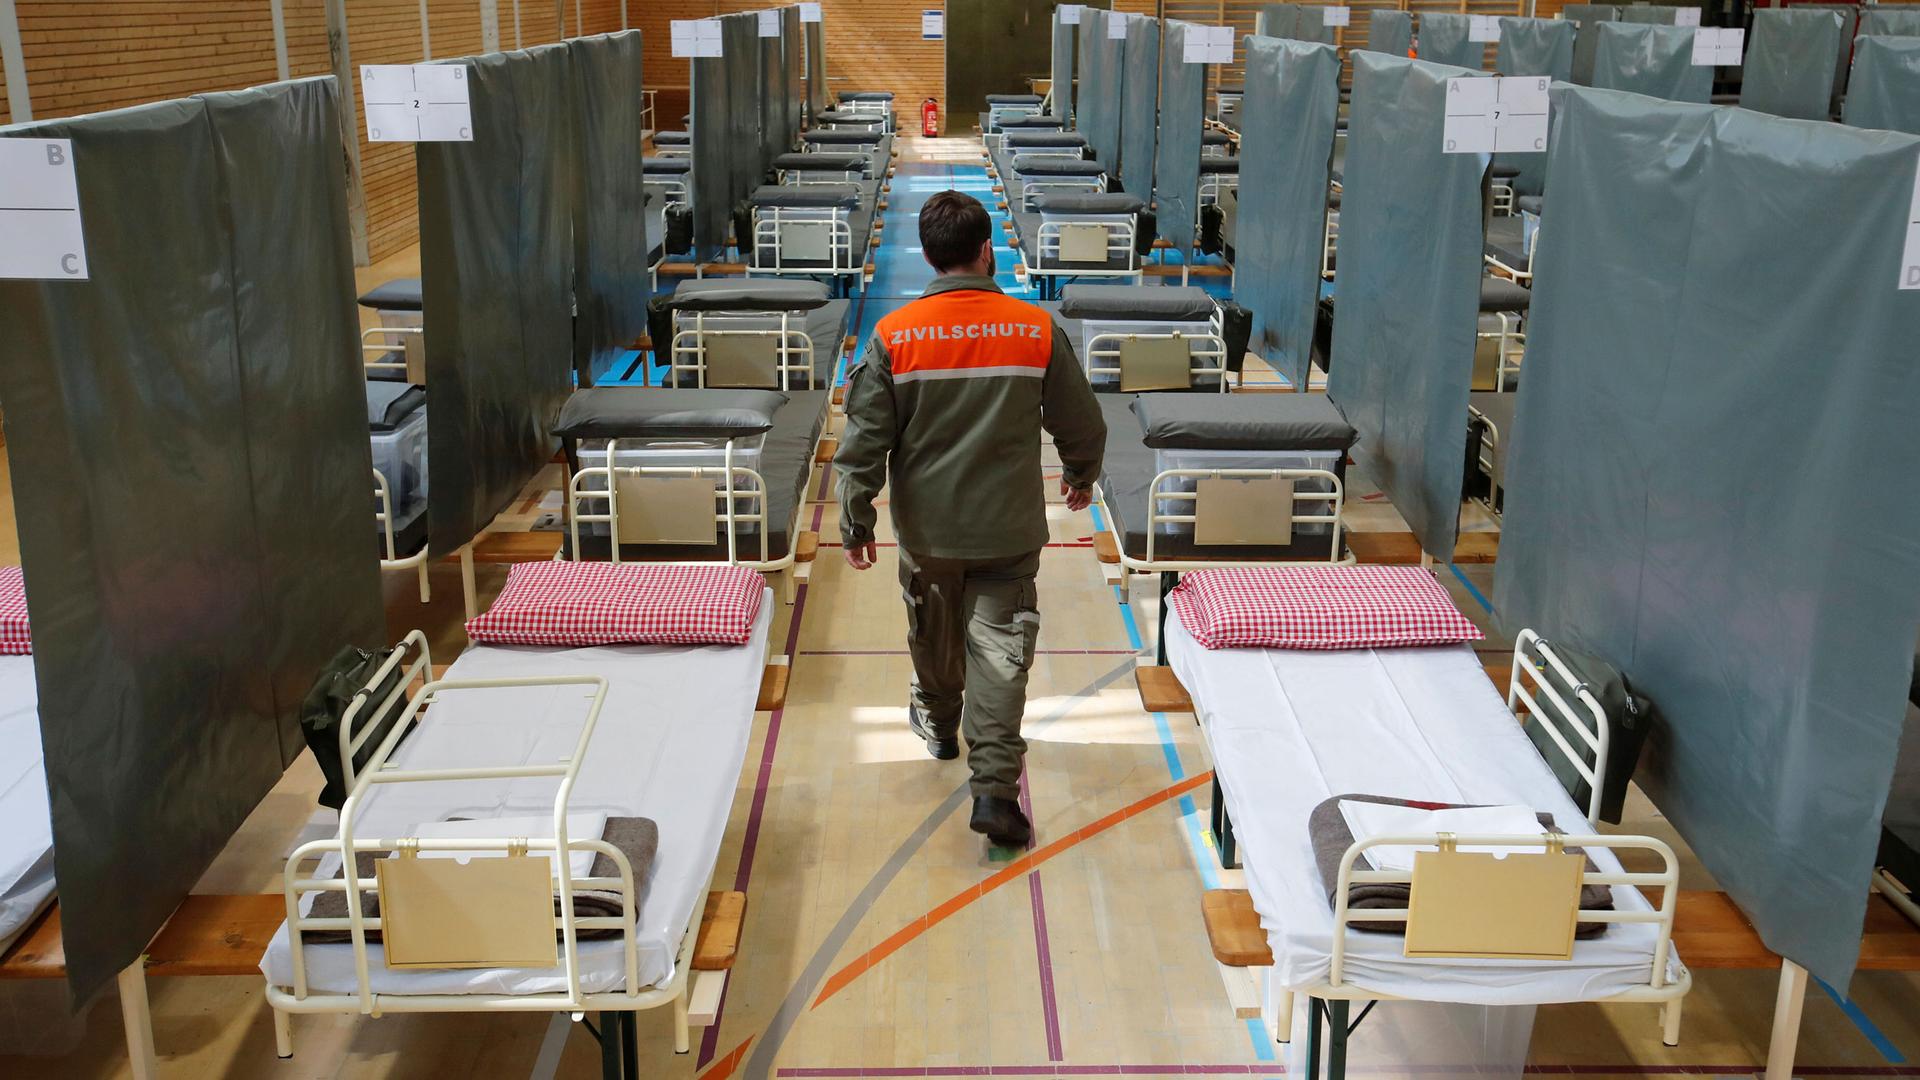 A man wearing a work uniform with an orange top walks down an aisle with several beds lining both sides.